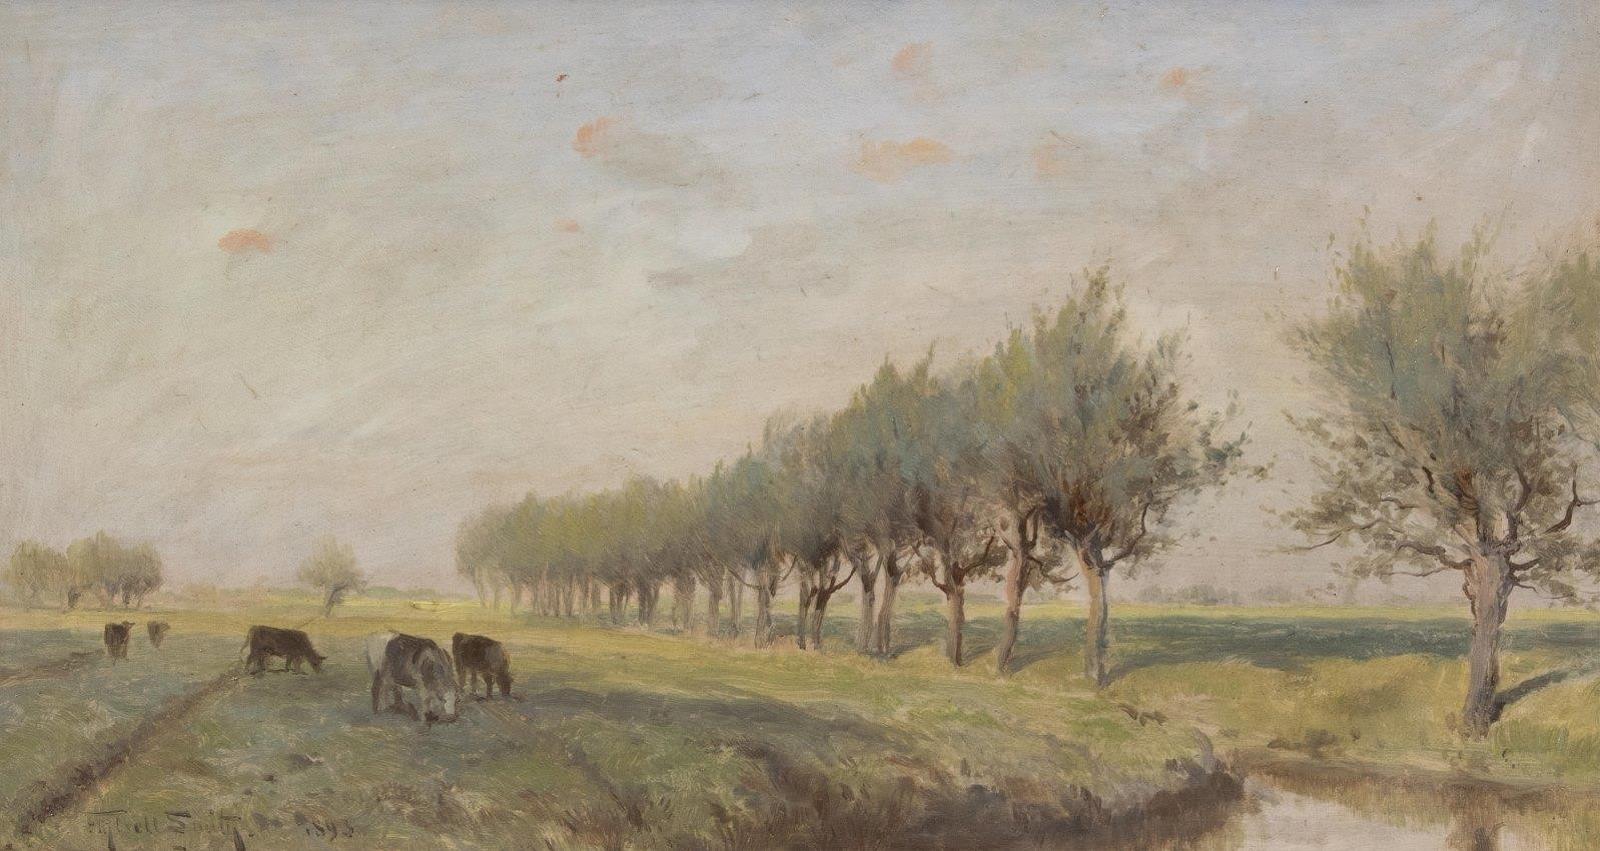 Frederic Martlett Bell-Smith (1846-1923) - A Pastoral Scene With Grazing Cattle; 1893